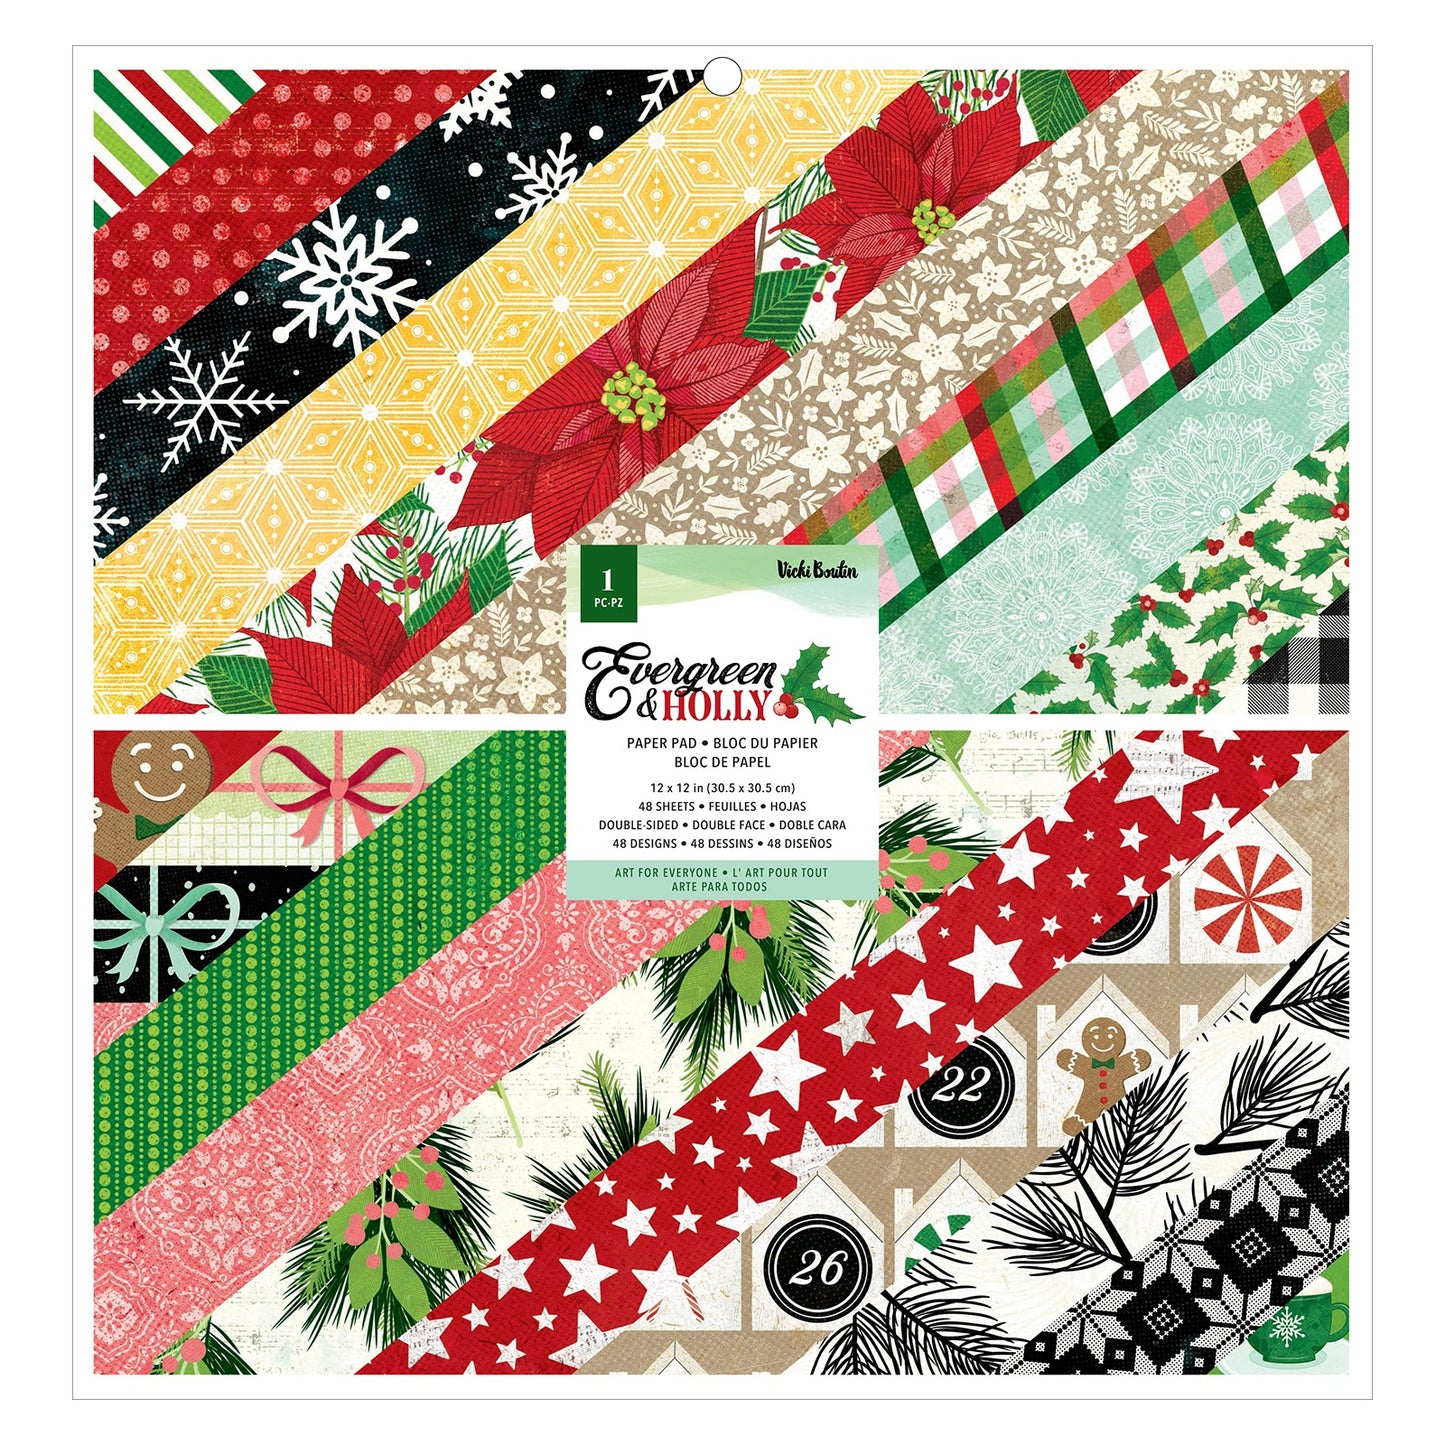 Buy Christmas Paper Pad 12x12, Scrapmir Merry Christmas, December Daily  Journal Kit, Diy Scrapbook Kits for Adults, New Year Decorative Paper  Online in India 